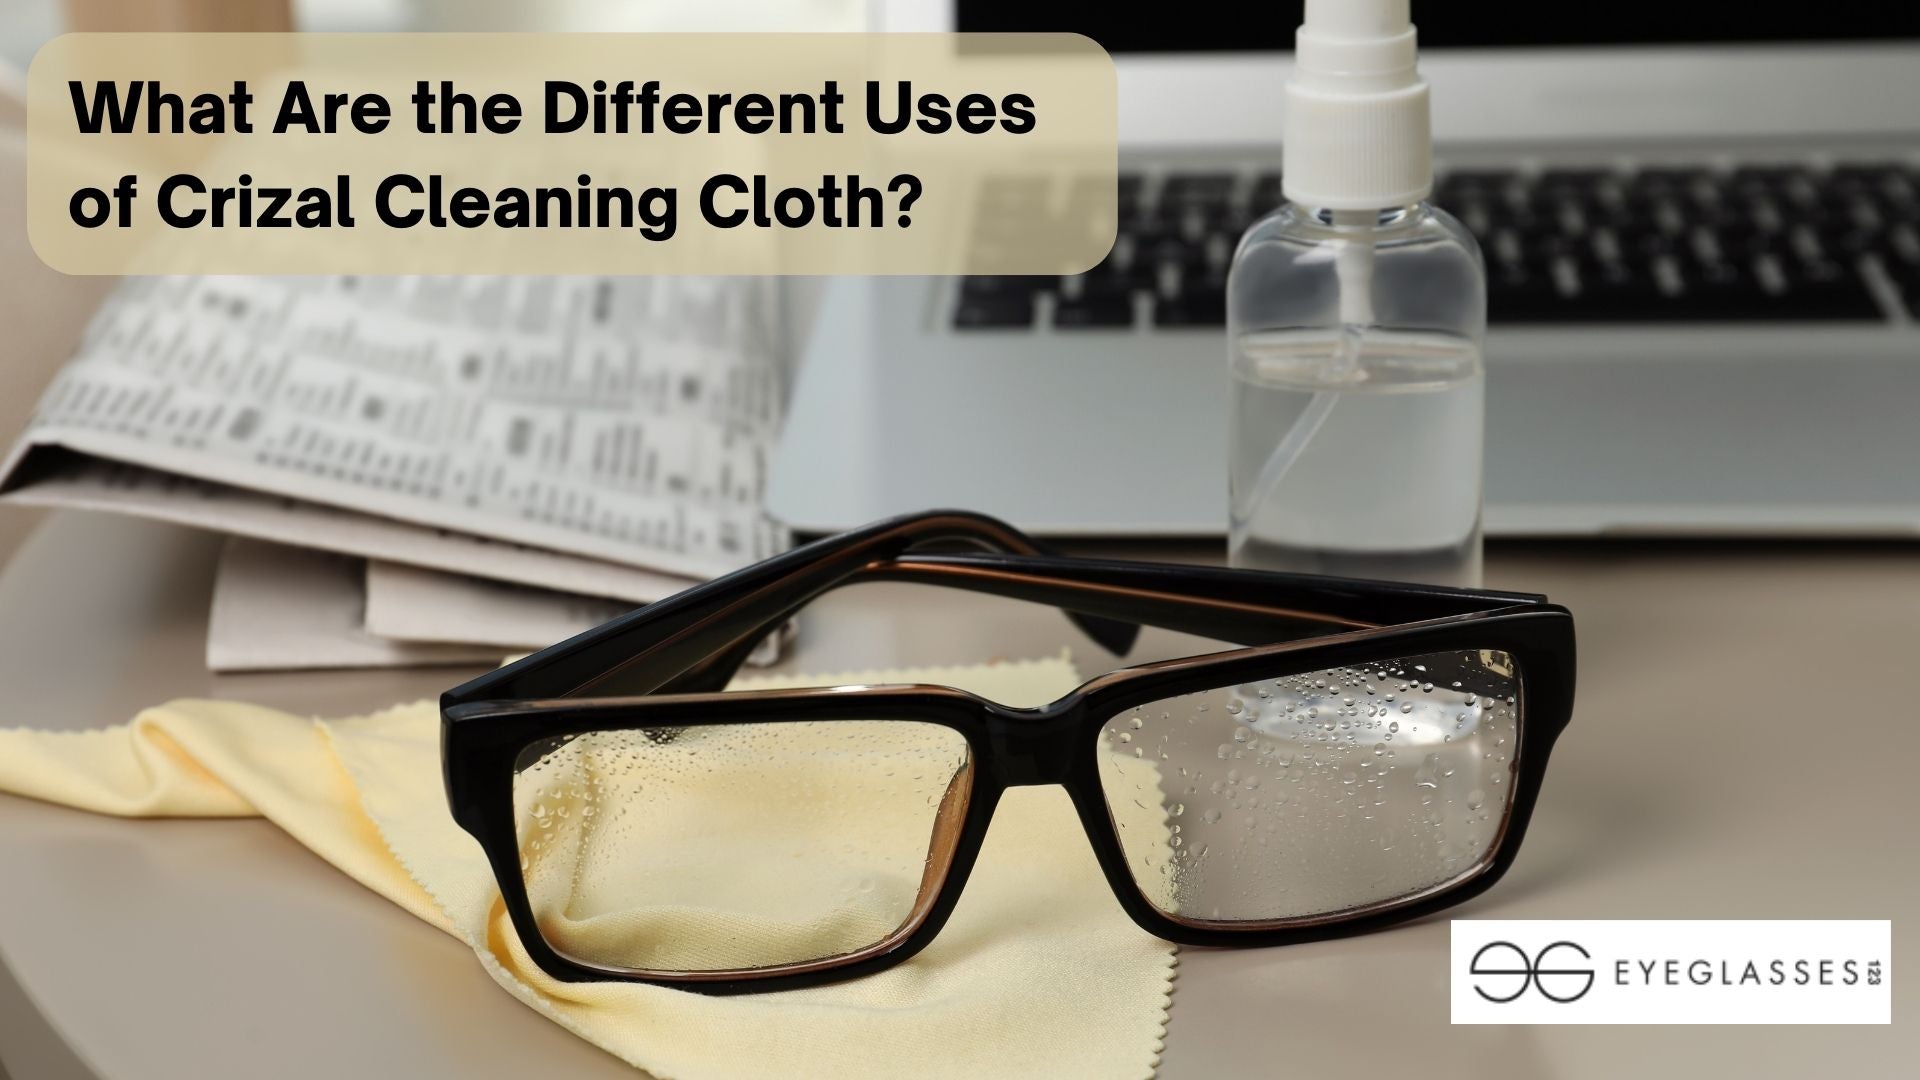 What Are the Different Uses of Crizal Cleaning Cloth?